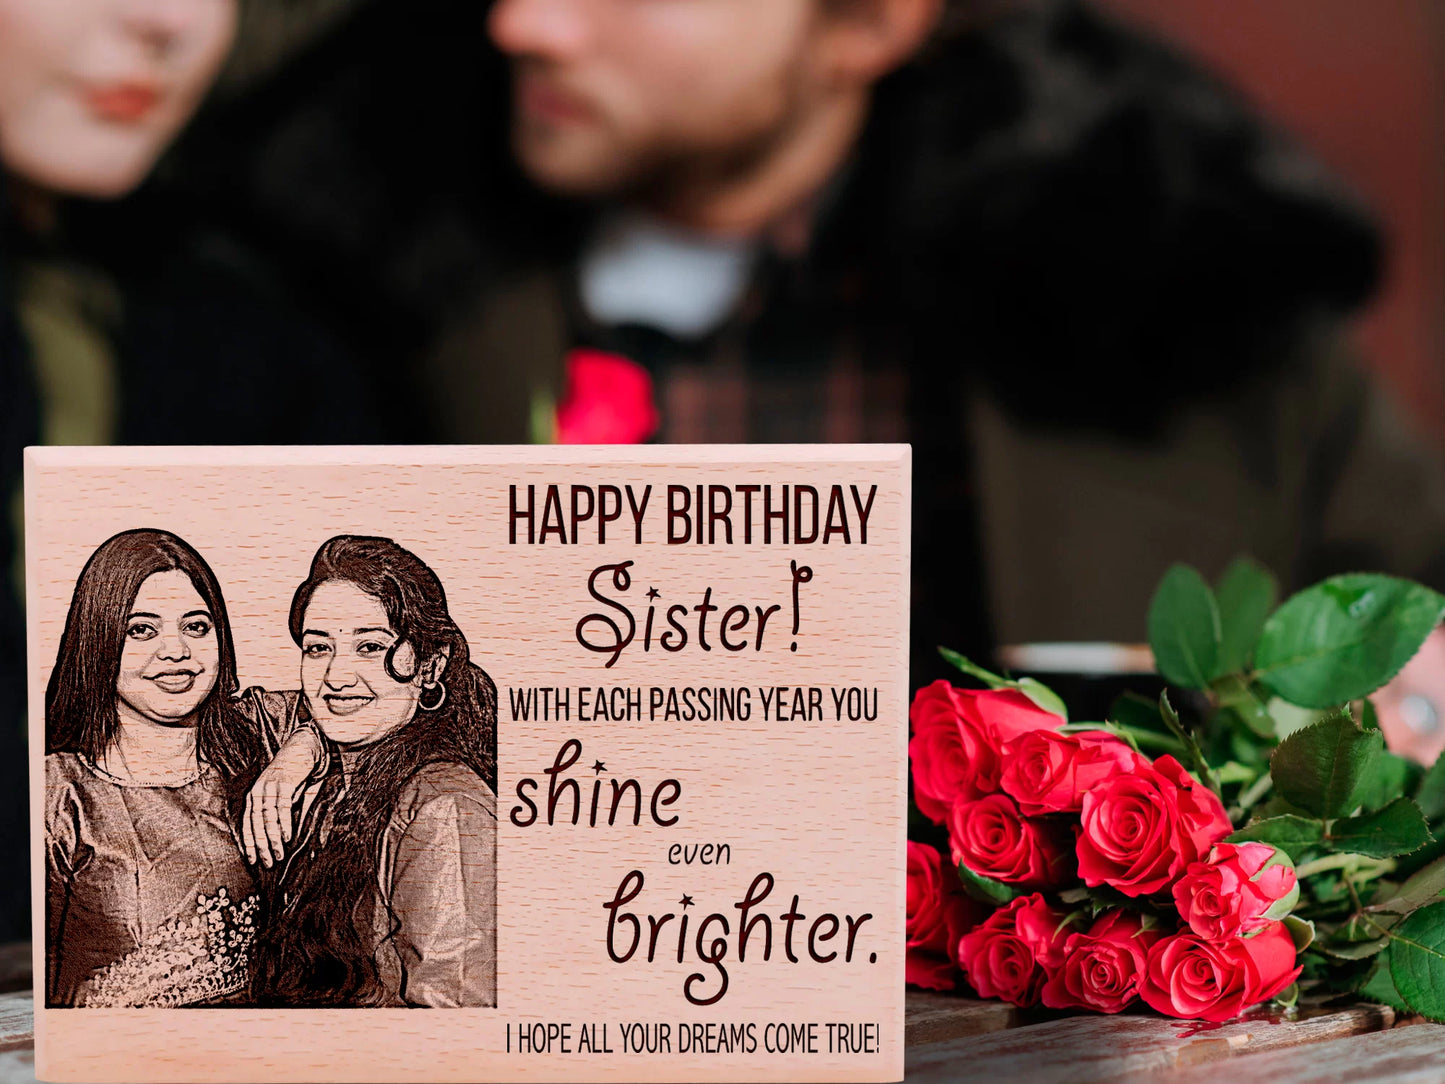 Wooden Engraved Personalized Photo Frame Gift for Best Friend (6×4 in)